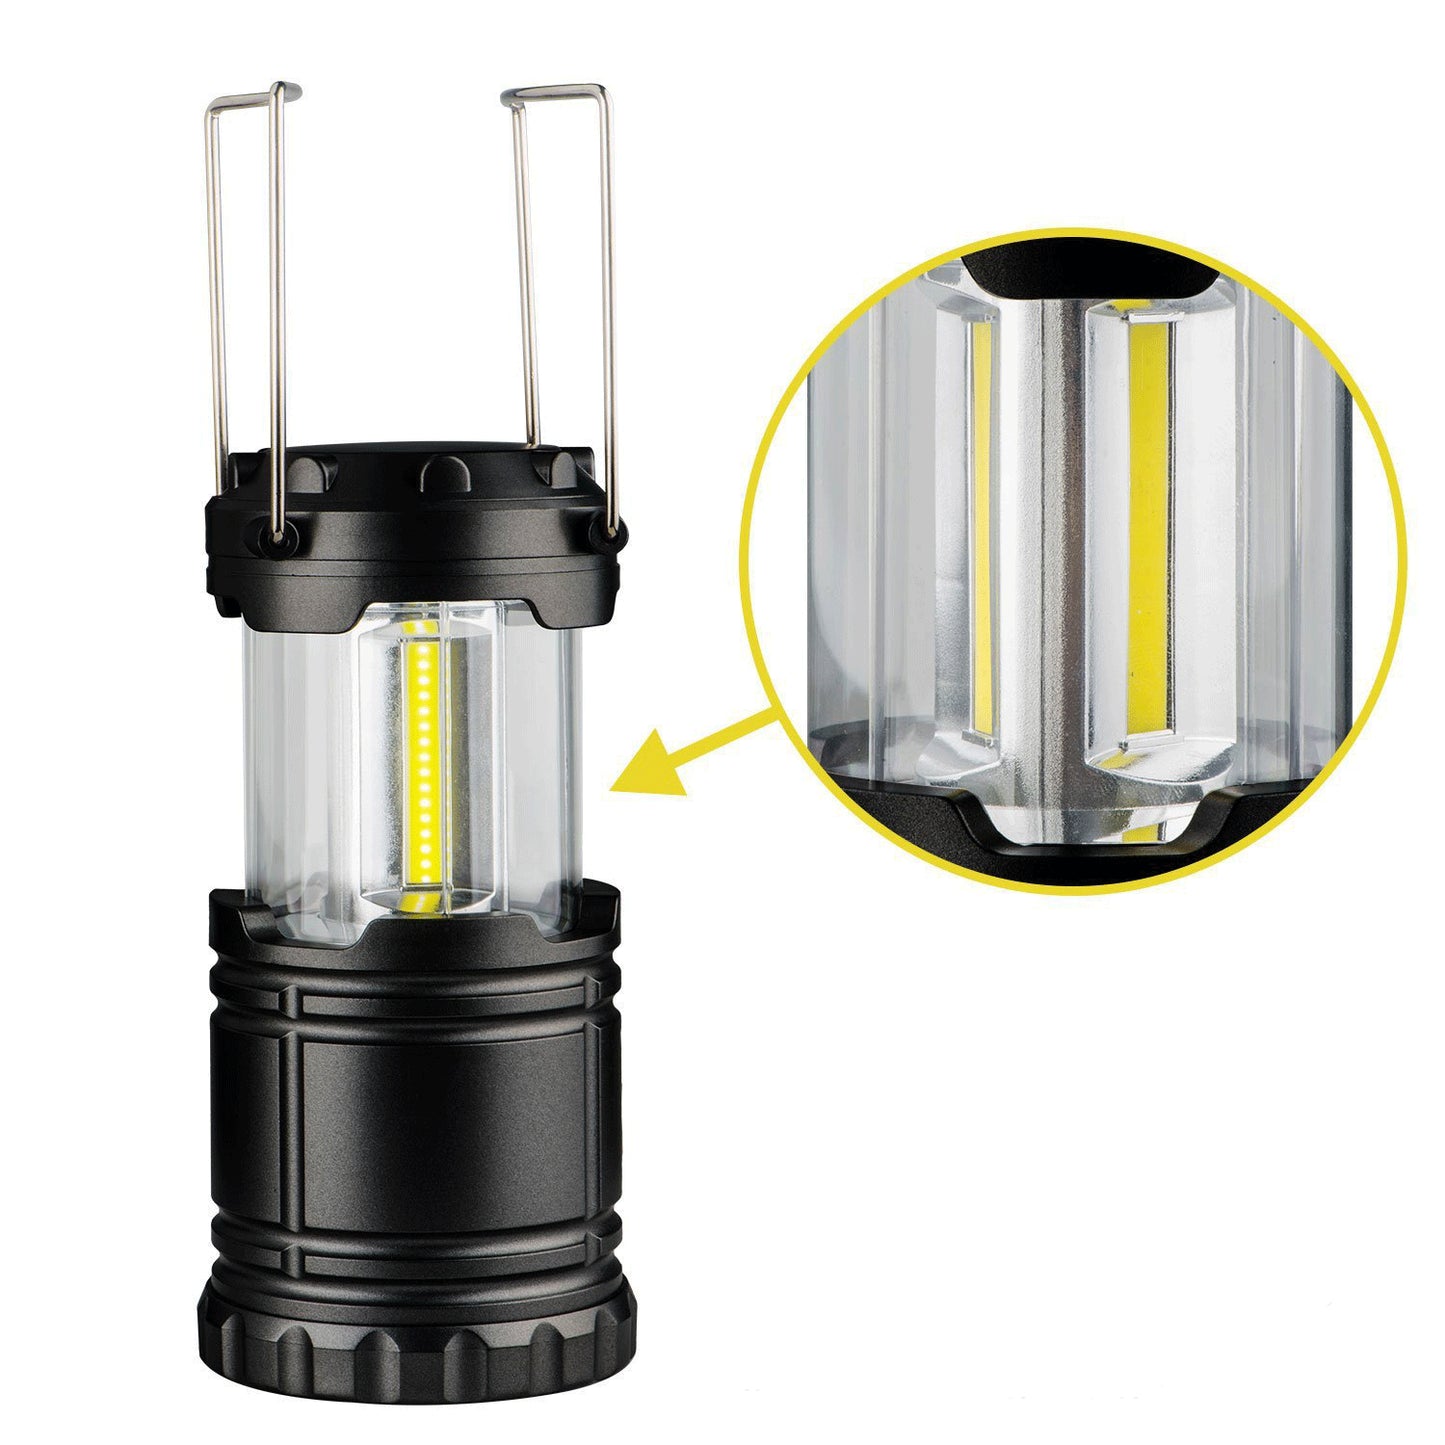 Solar Powered Lantern 2 in 1 Design: Light Up Your Nights at Home and The Outdoors